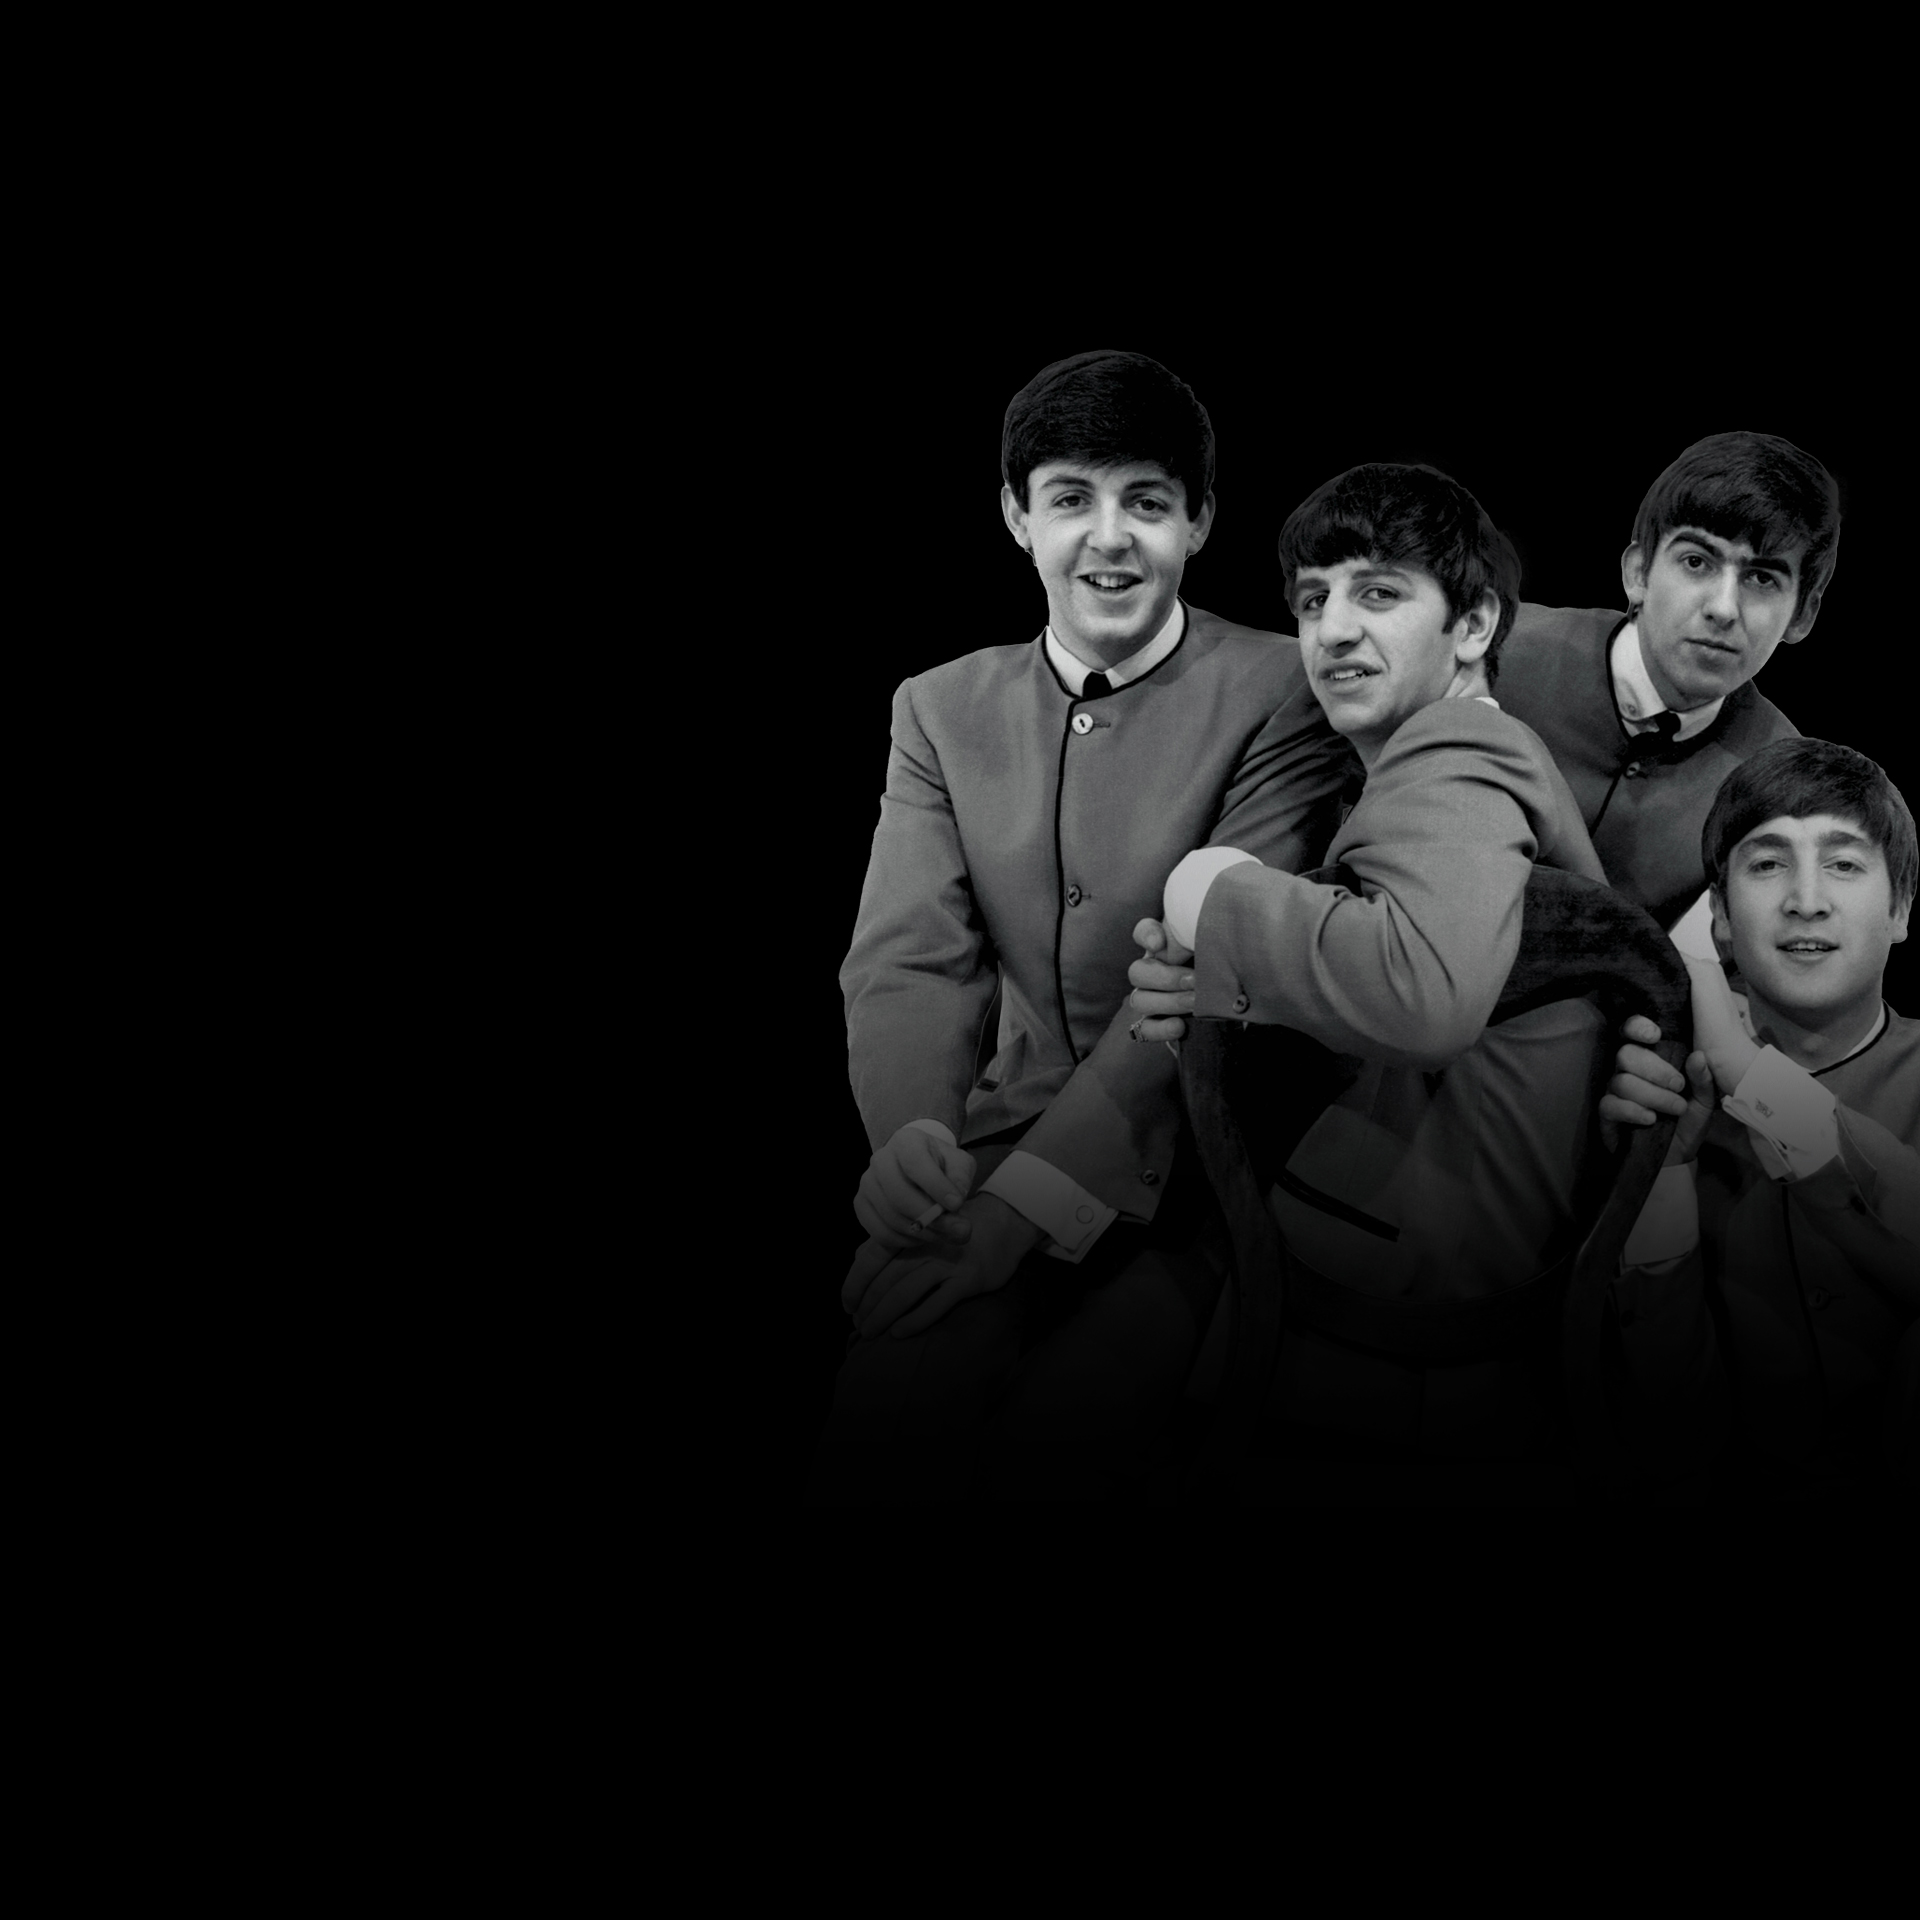 The Beatles Channel